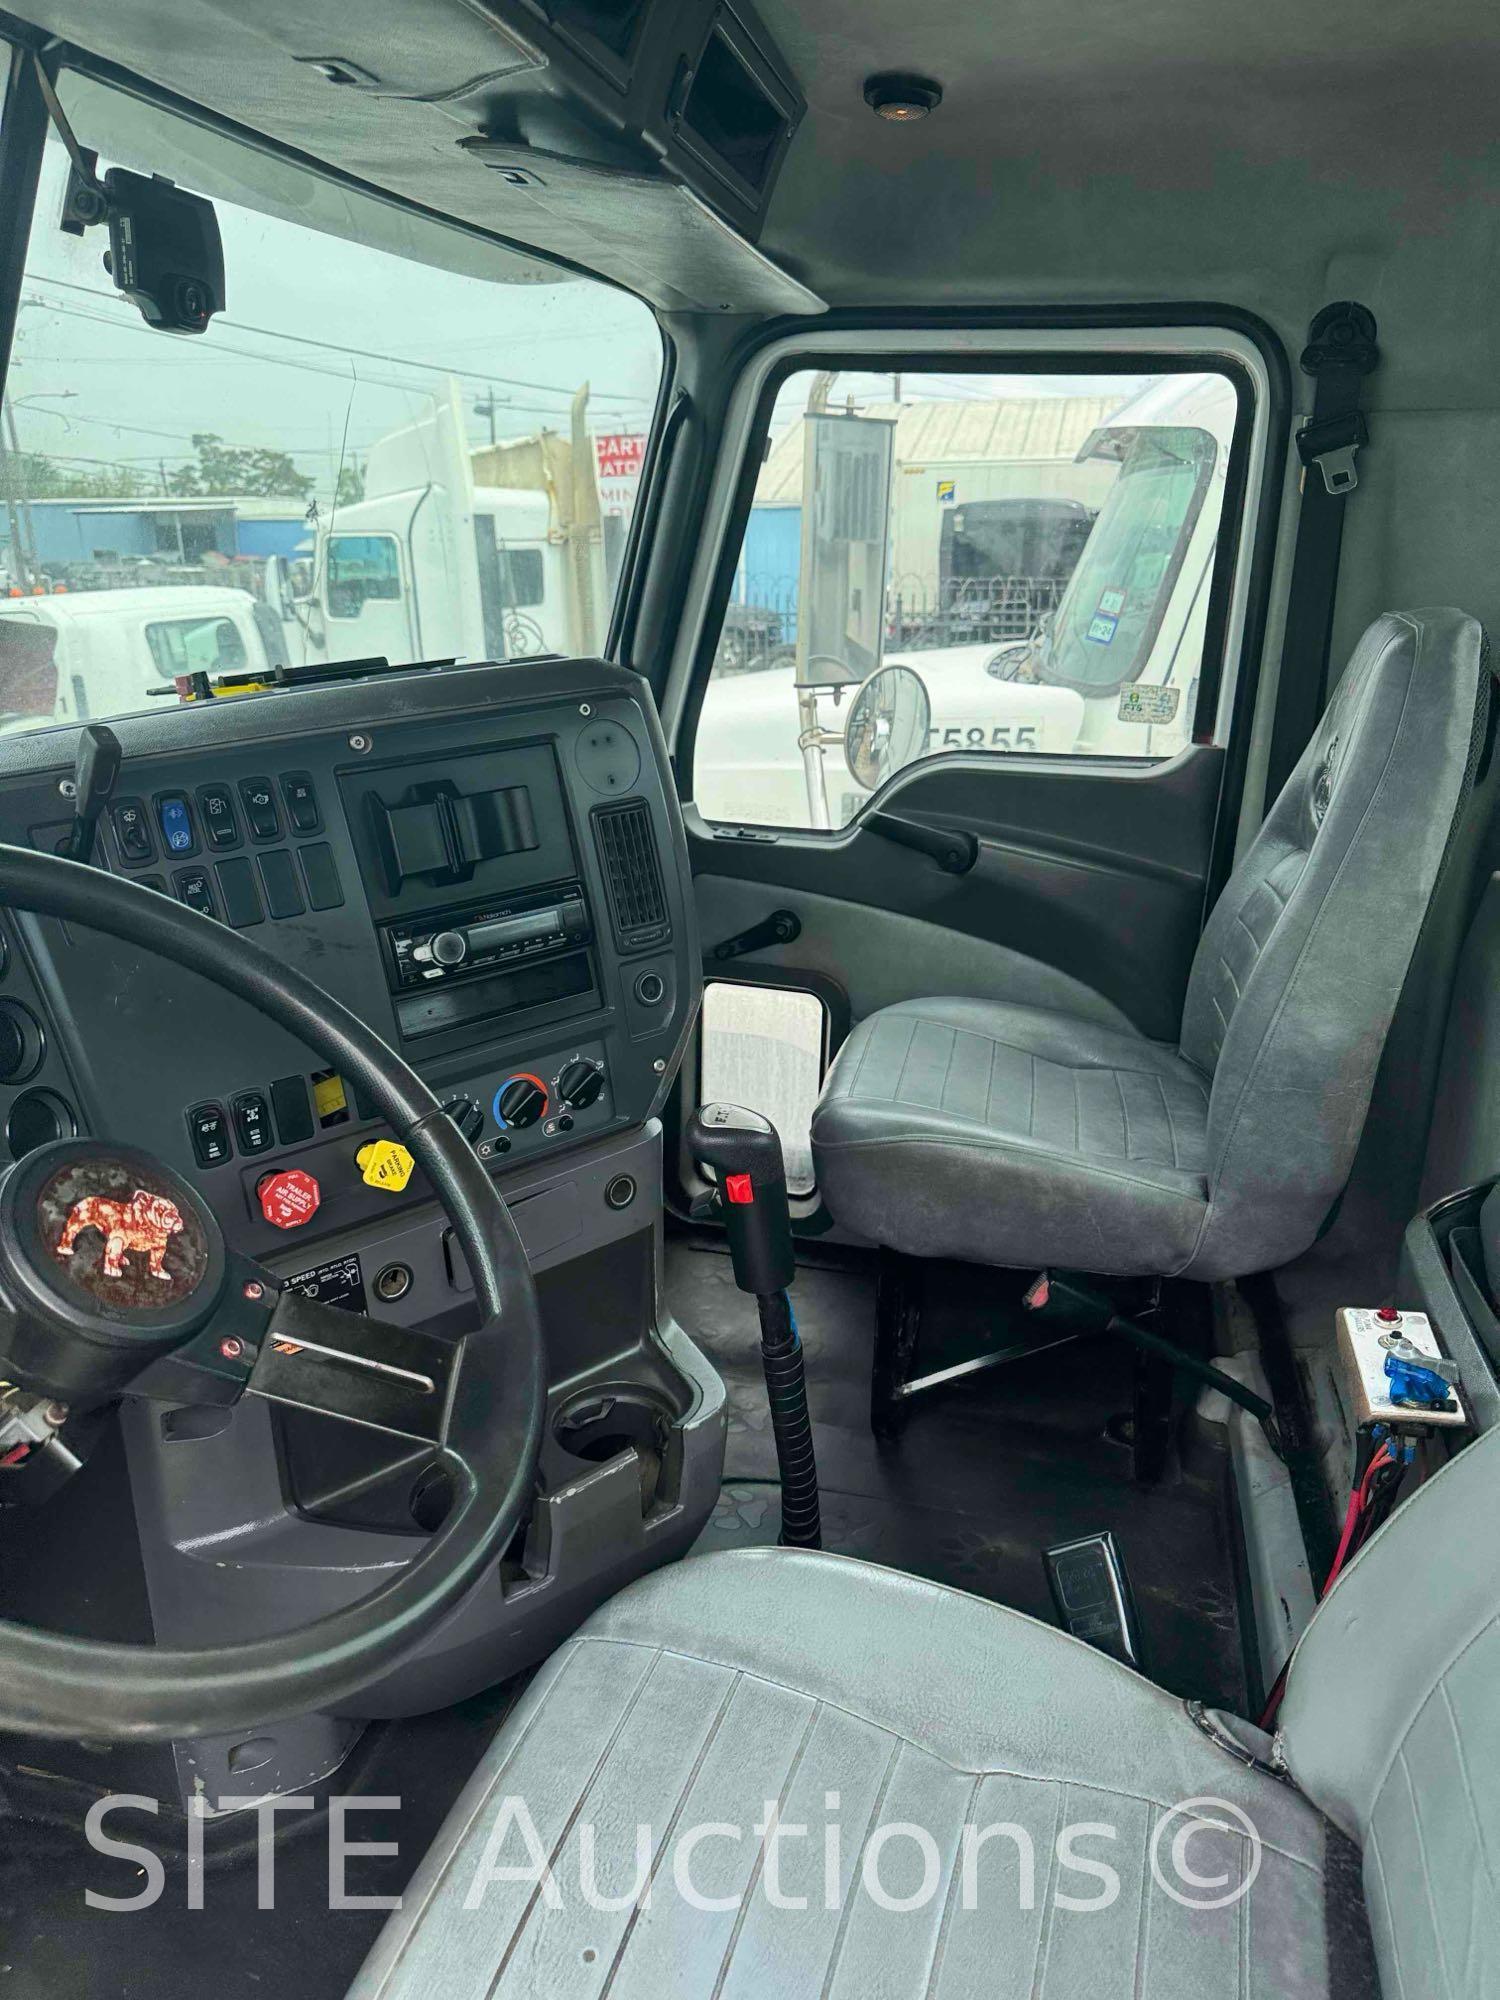 2008 Mack CHU613 T/A Daycab Truck Tractor